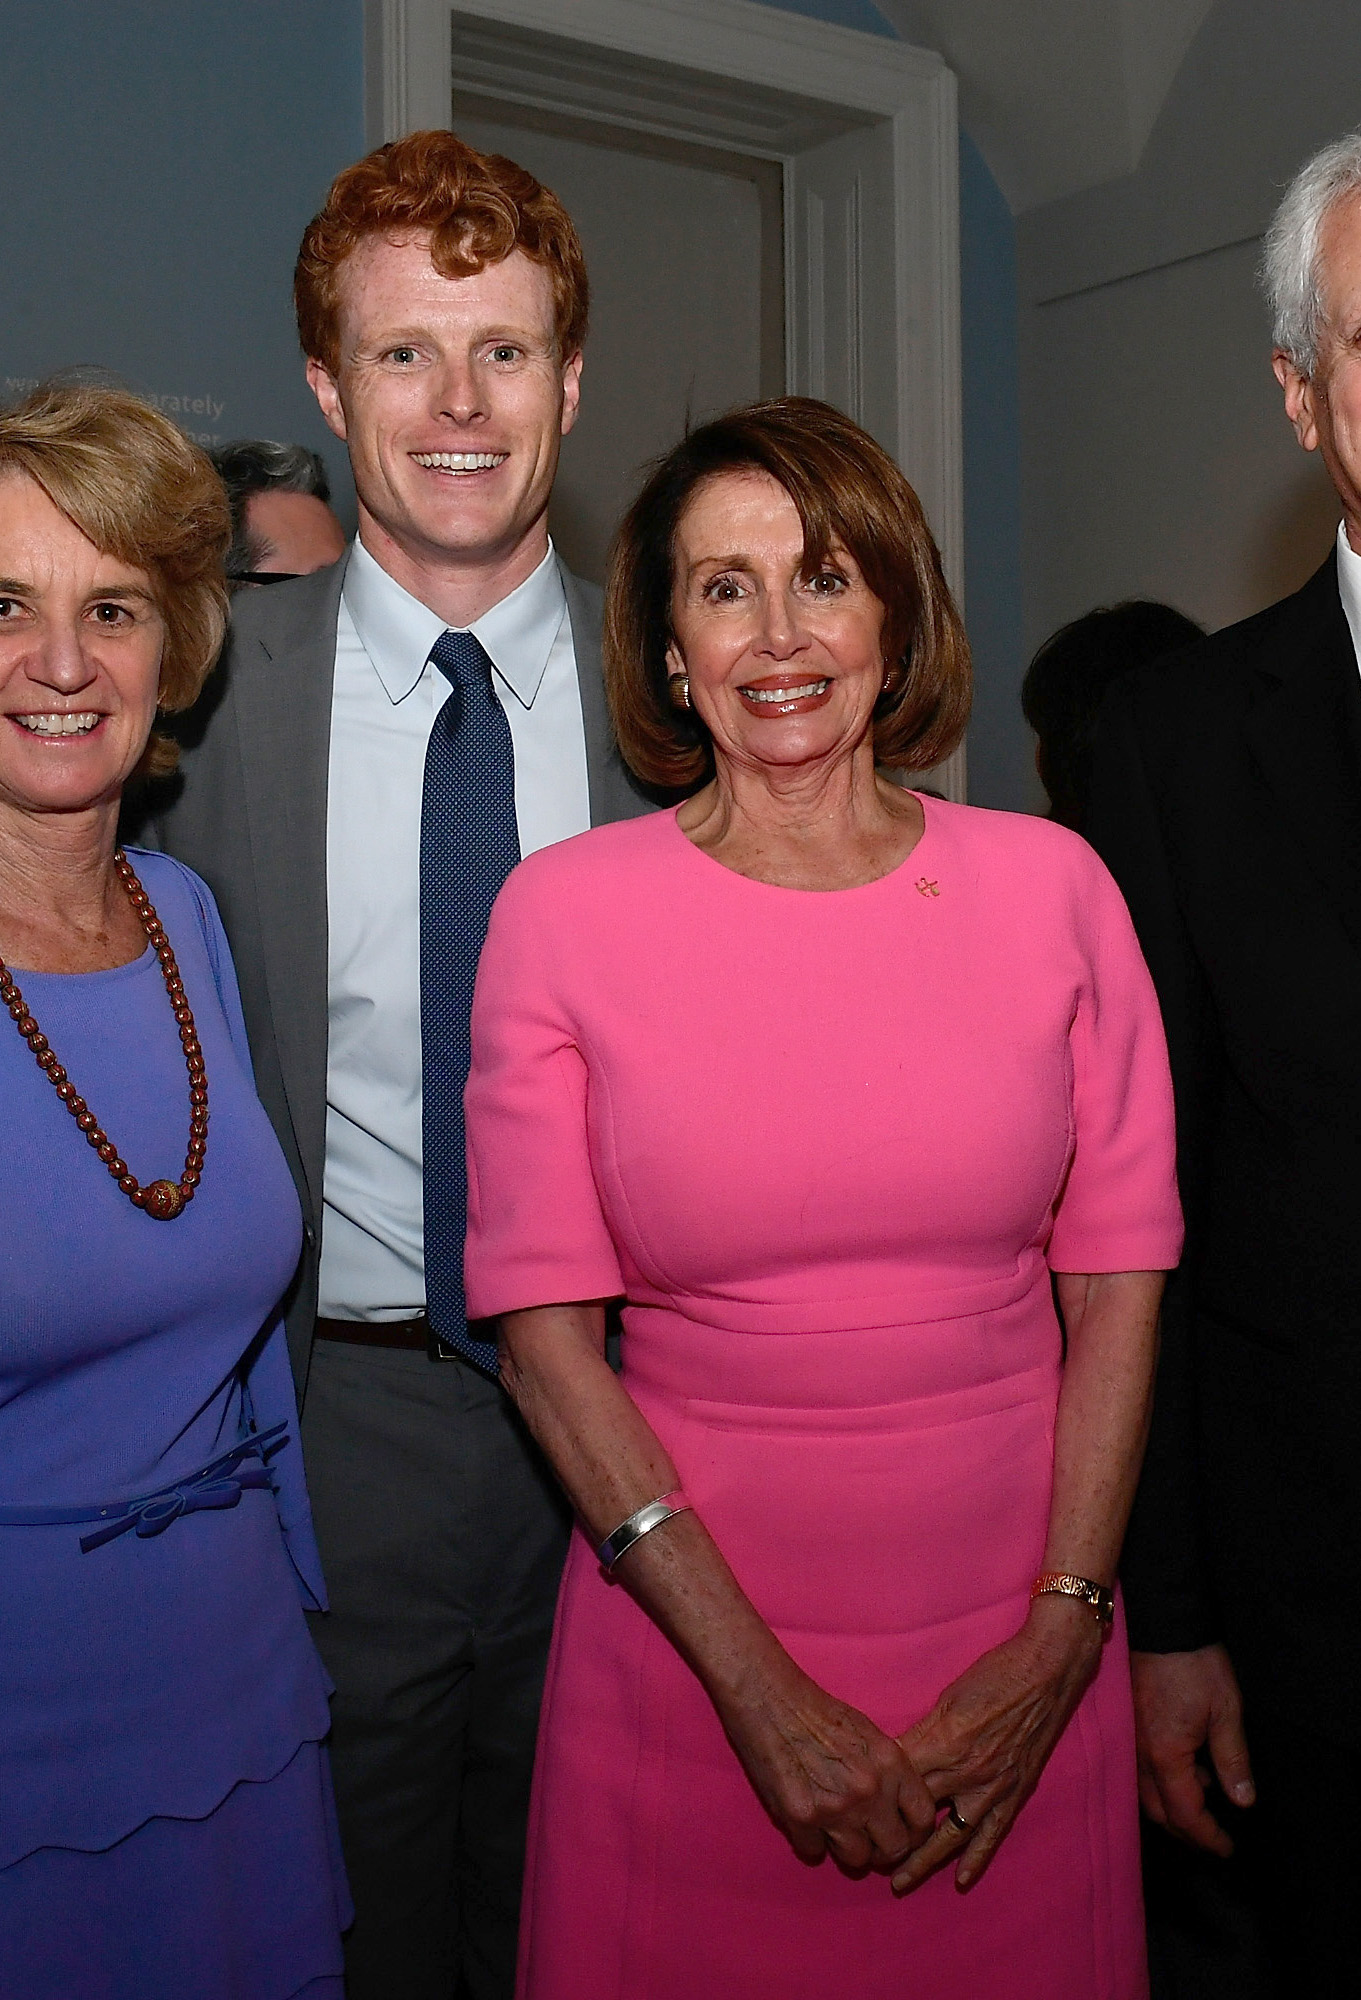 PHOTO: Rep. Joe Kennedy III (D-MA)and House Speaker Nancy Pelosi (D-CA) attend at American Visionary: John F. Kennedy's Life and Times debut gala at Smithsonian American Art Museum, May 2, 2017, in Washington, D.C. 